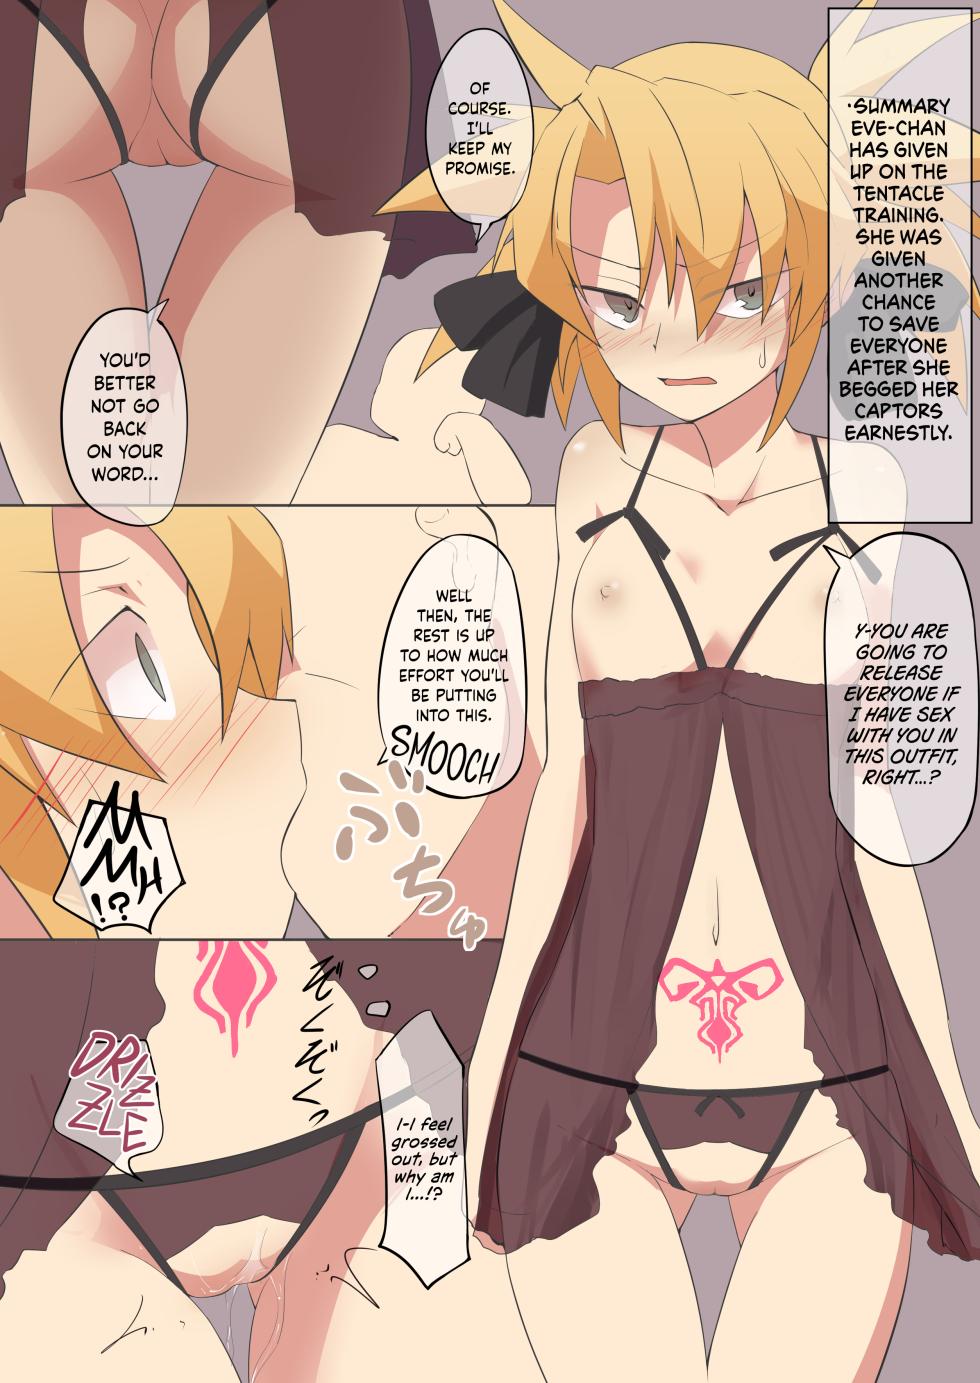 [Developers (Nagasode)] Eve-chan Fell Prey to the Tentacle Panties. [English] [Digital] - Page 22